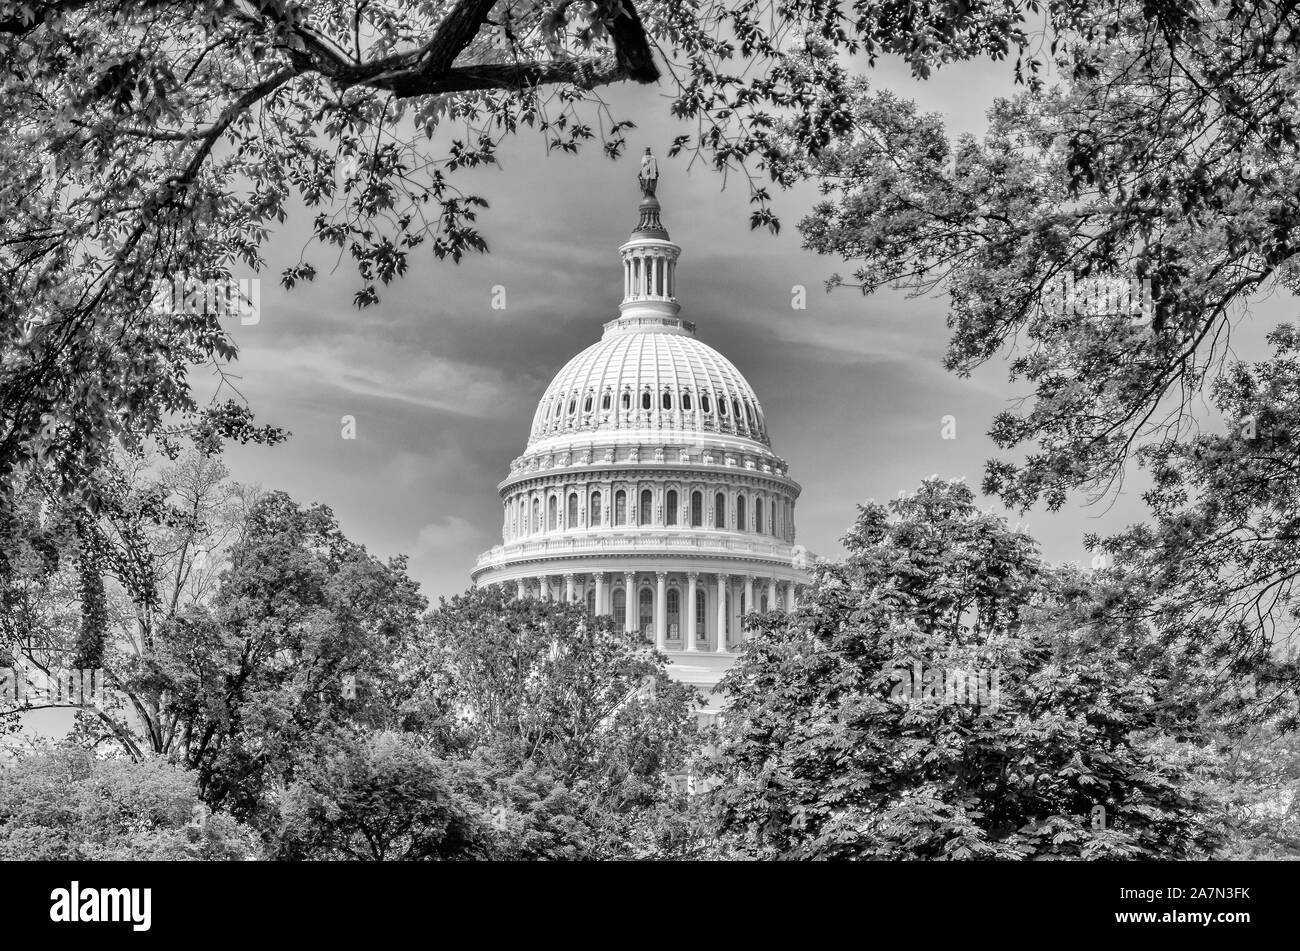 The dome of the United States Capitol building, iconic home of the United States Congress, framed by trees, Washington DC, USA Stock Photo